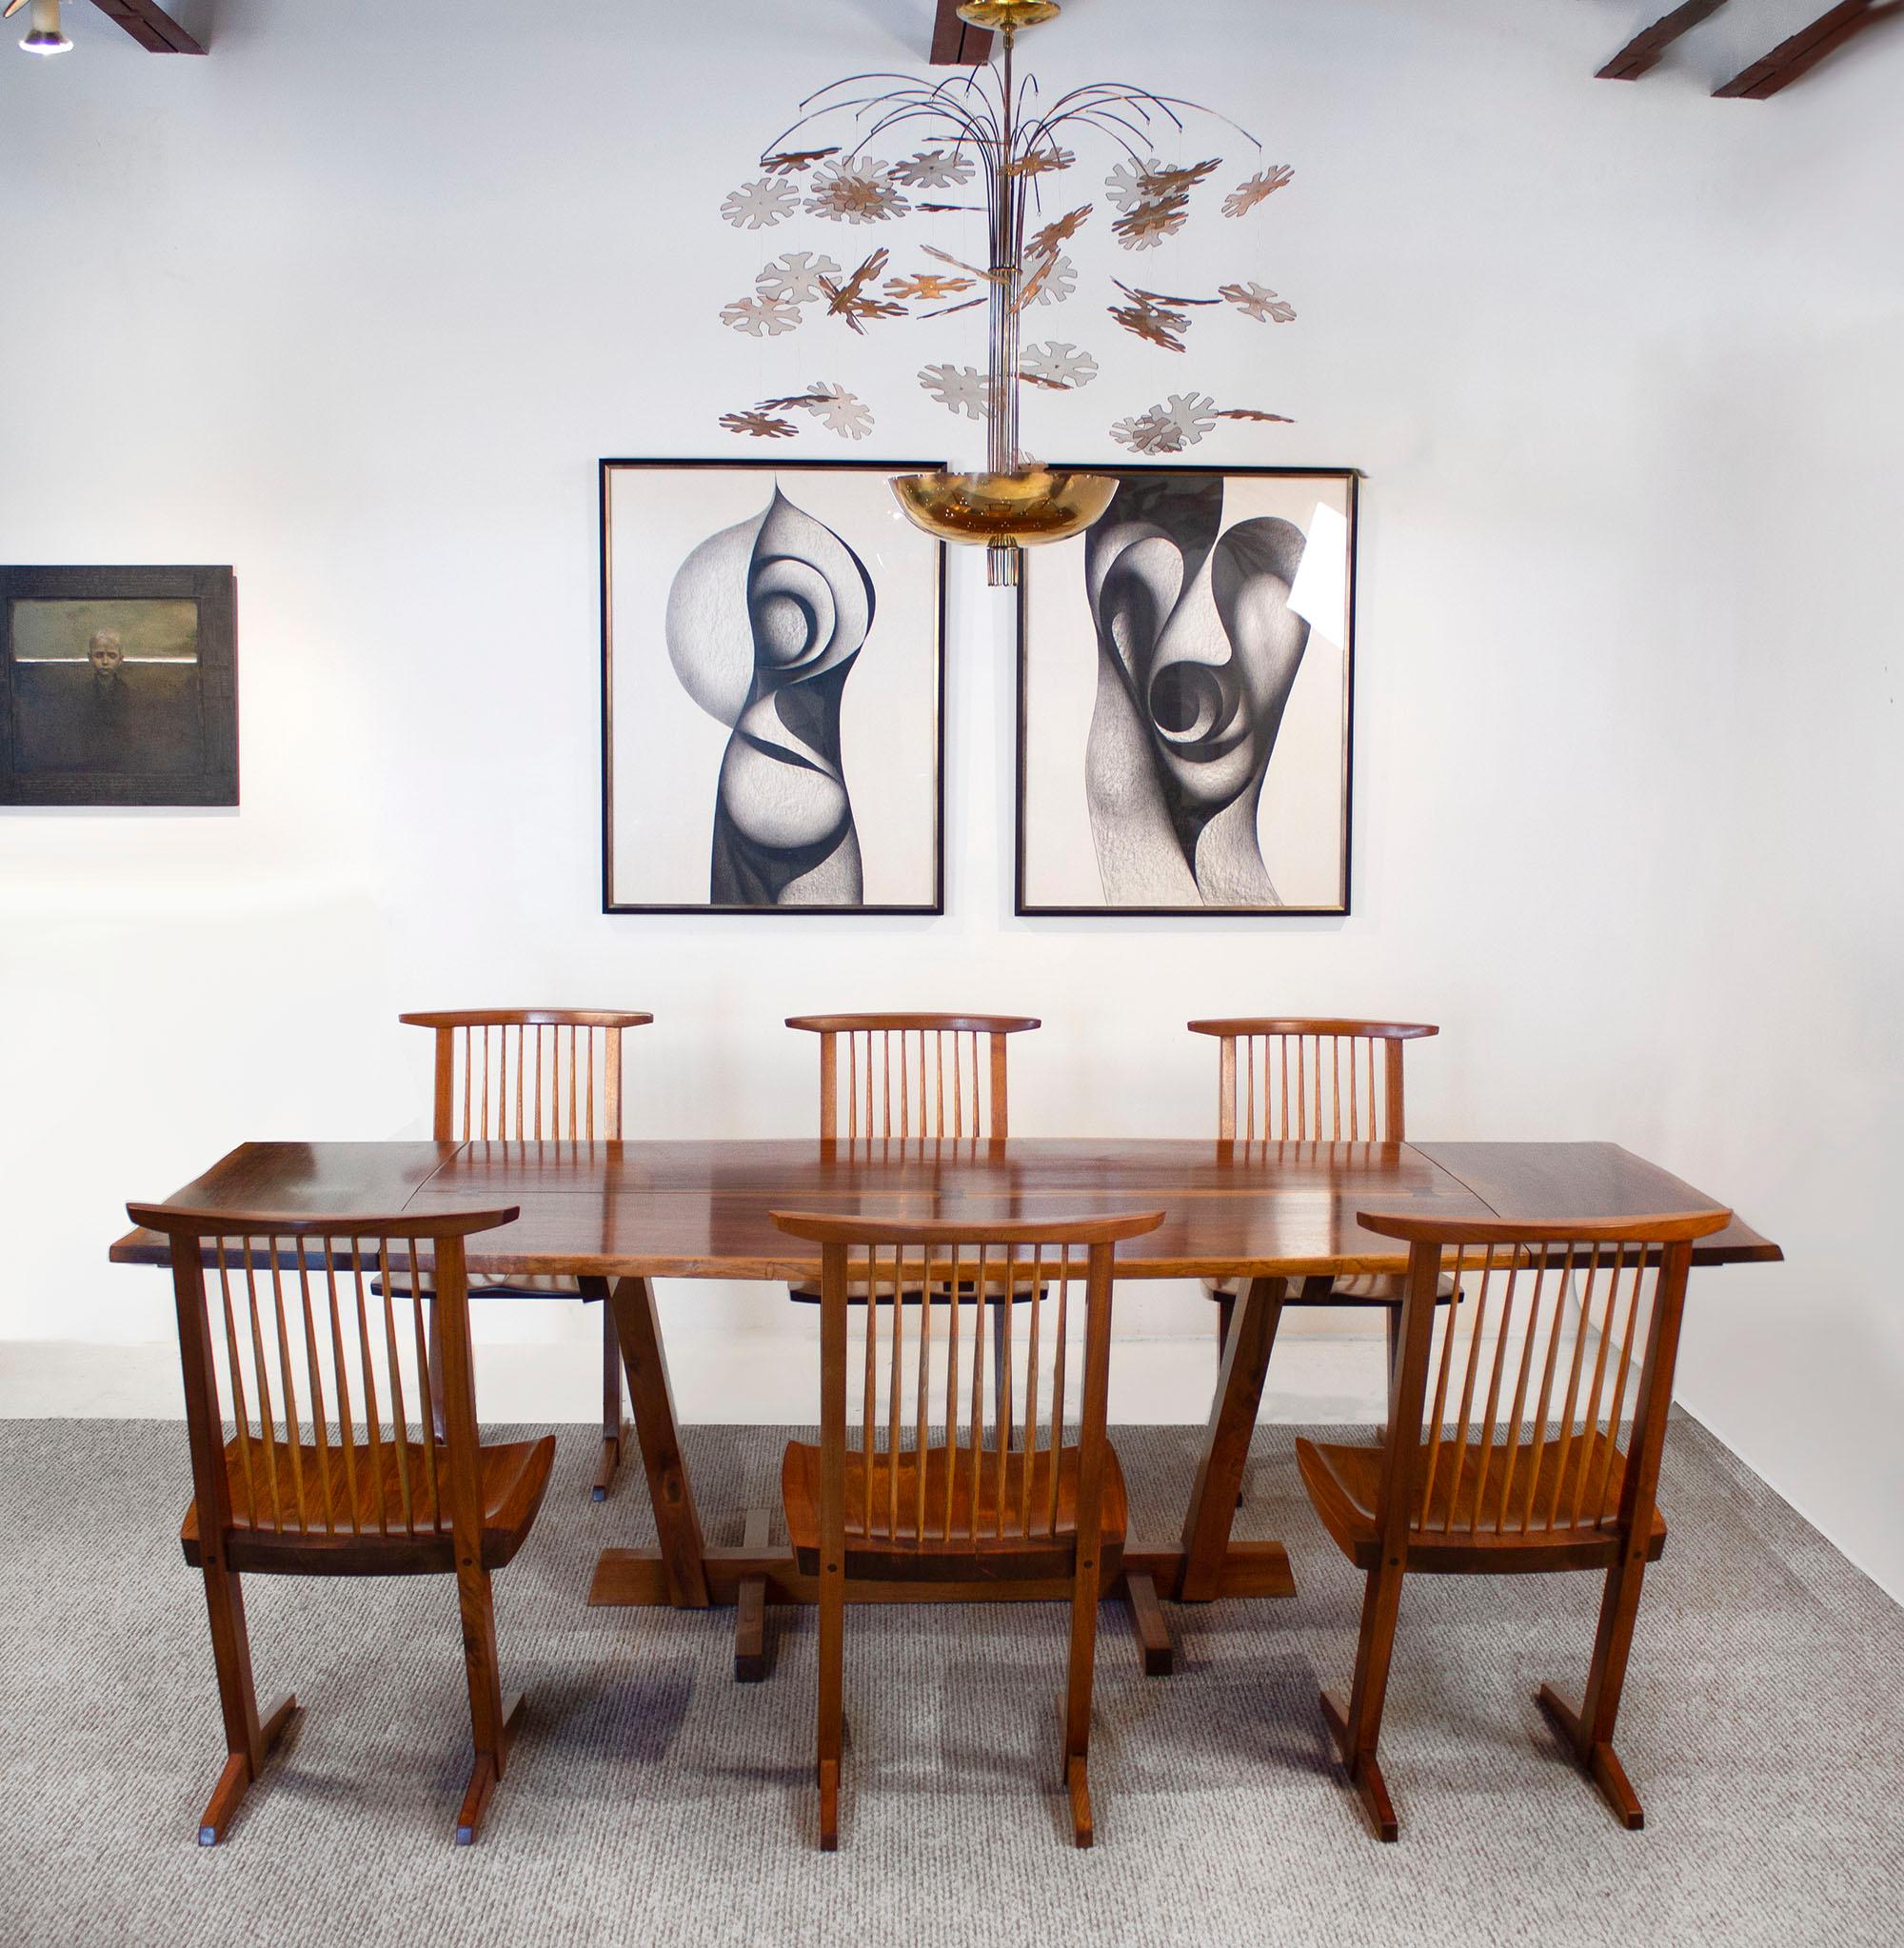 American George Nakashima Conoid Dining Set in Sap Walnut with Free Form Edges & 6 Chairs